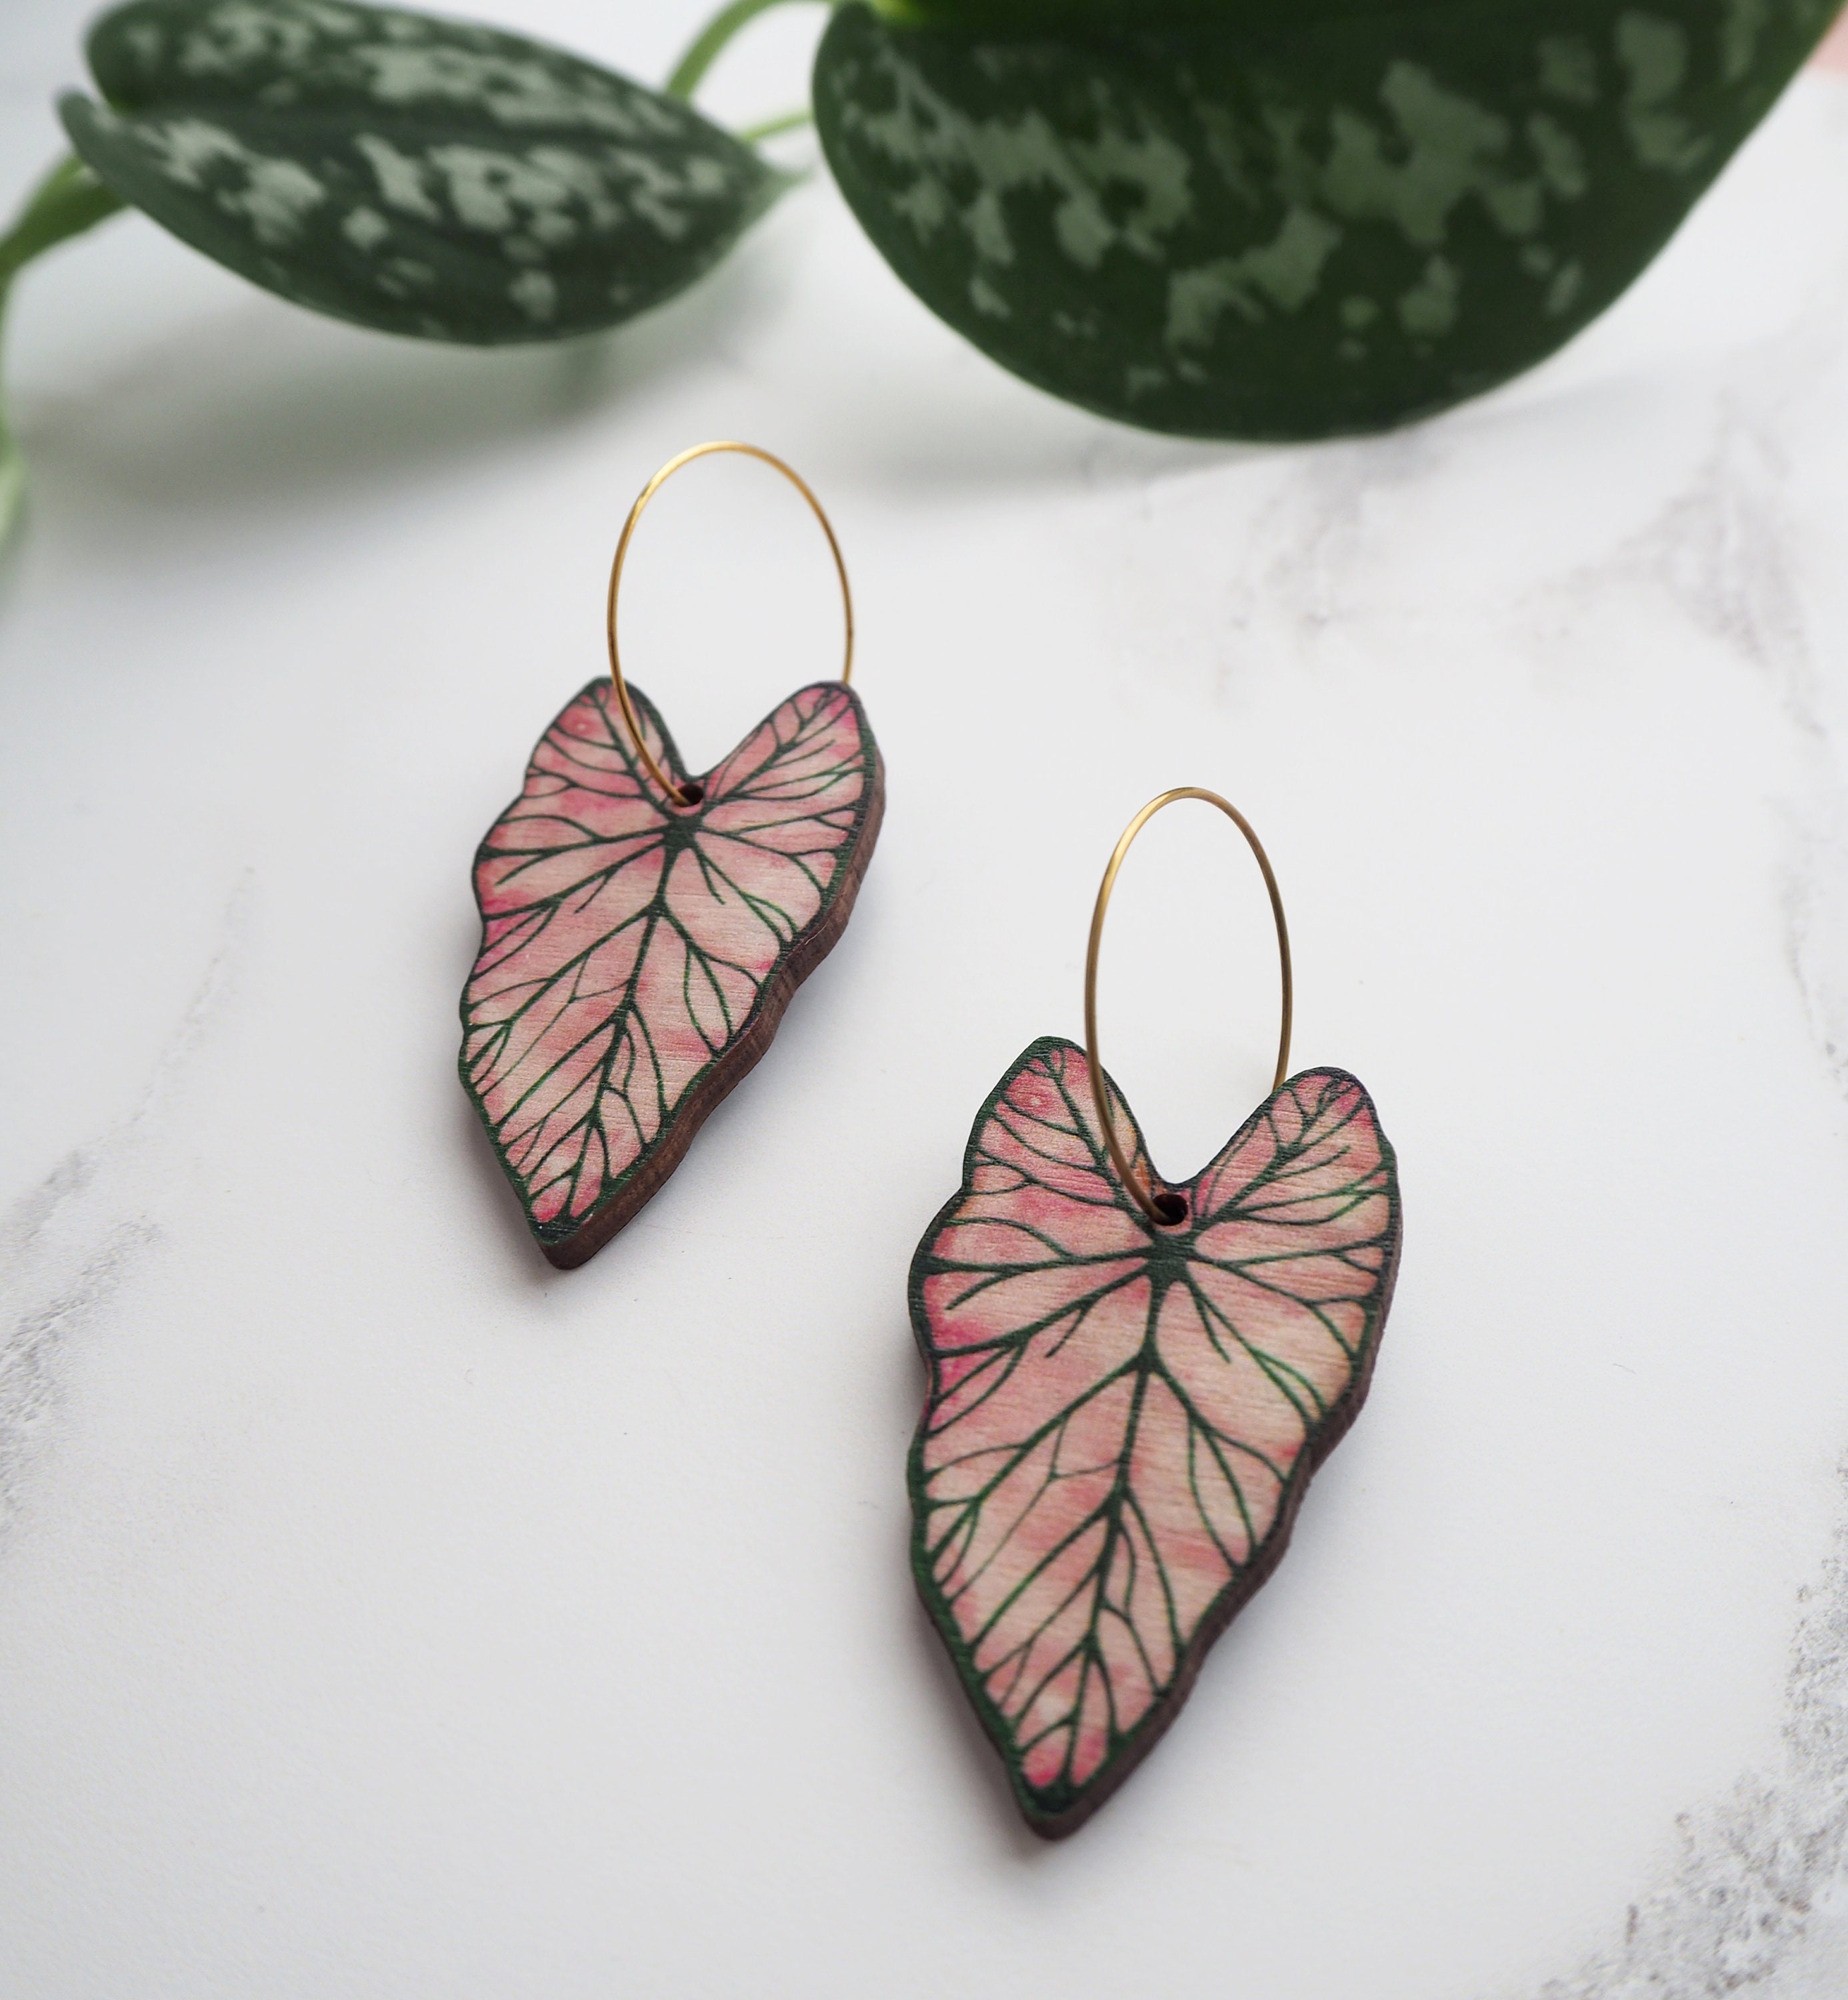 Pink Plant Earrings - Tropical Leaf Hoop Caladium Botanical Gifts For Her Mothers Day Gift